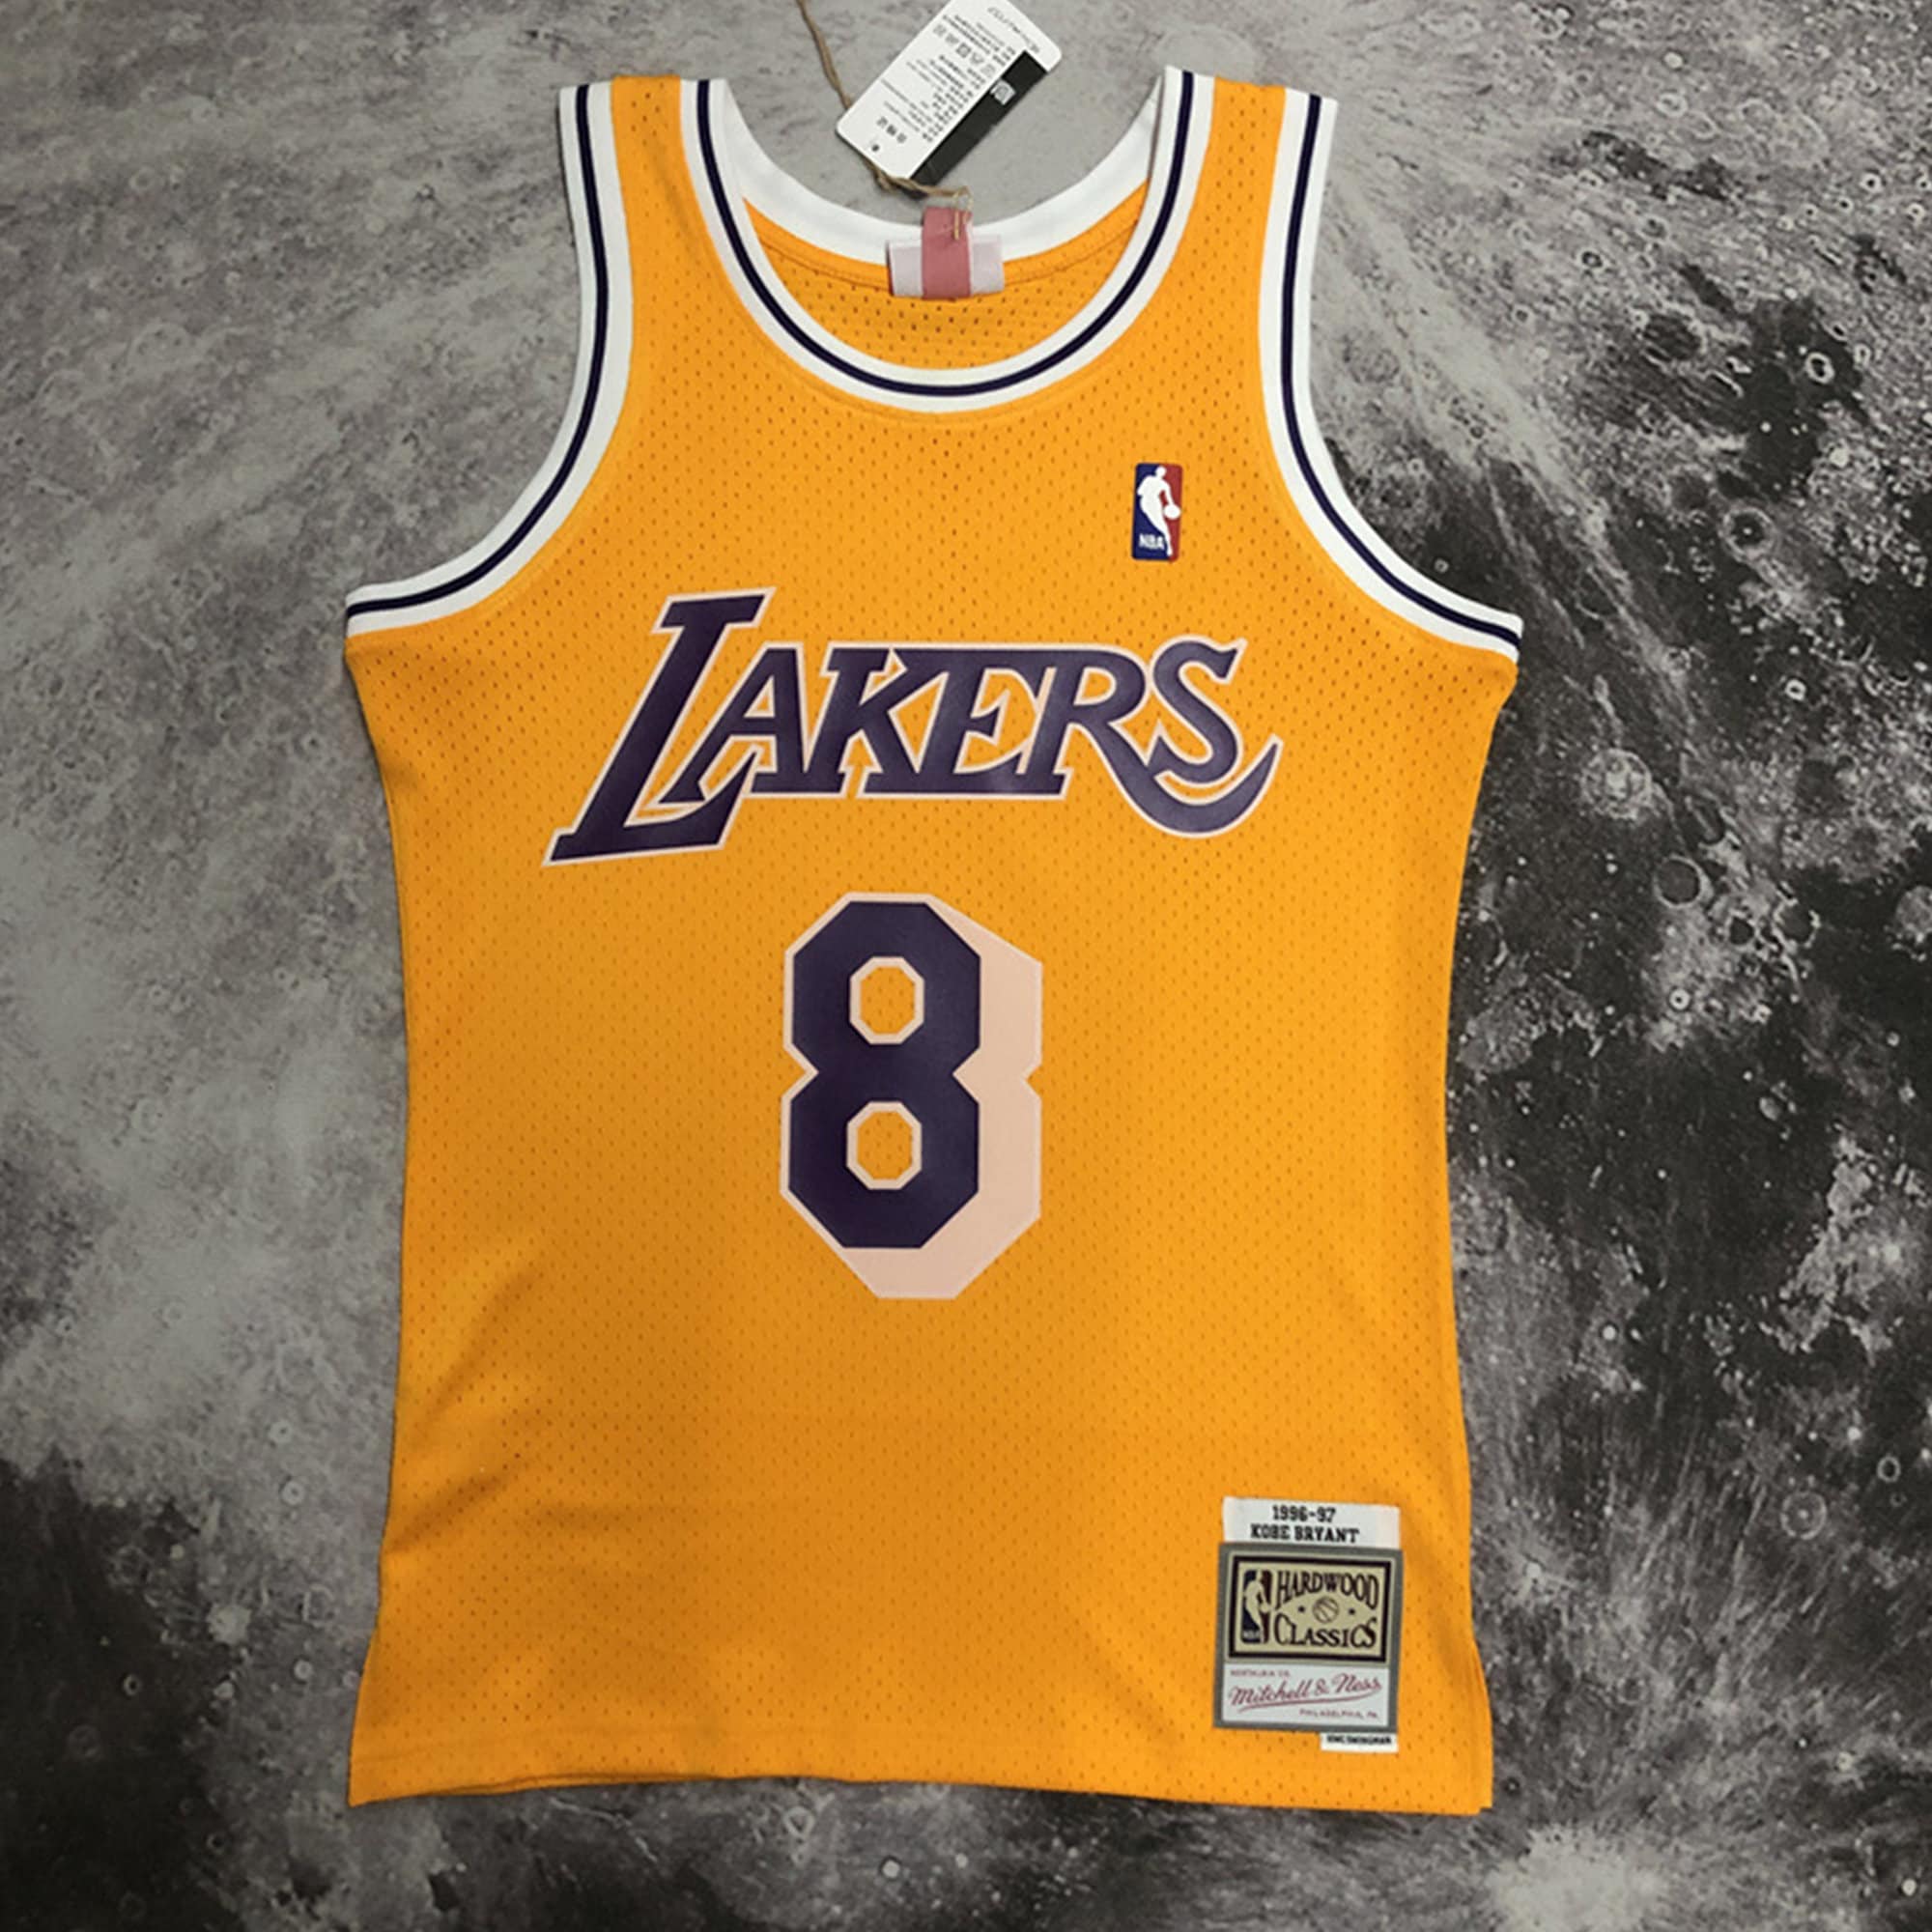 NEW Clot x Mitchell & Ness Kobe Bryant Lakers Throwback Jersey  Authentic Size 2X